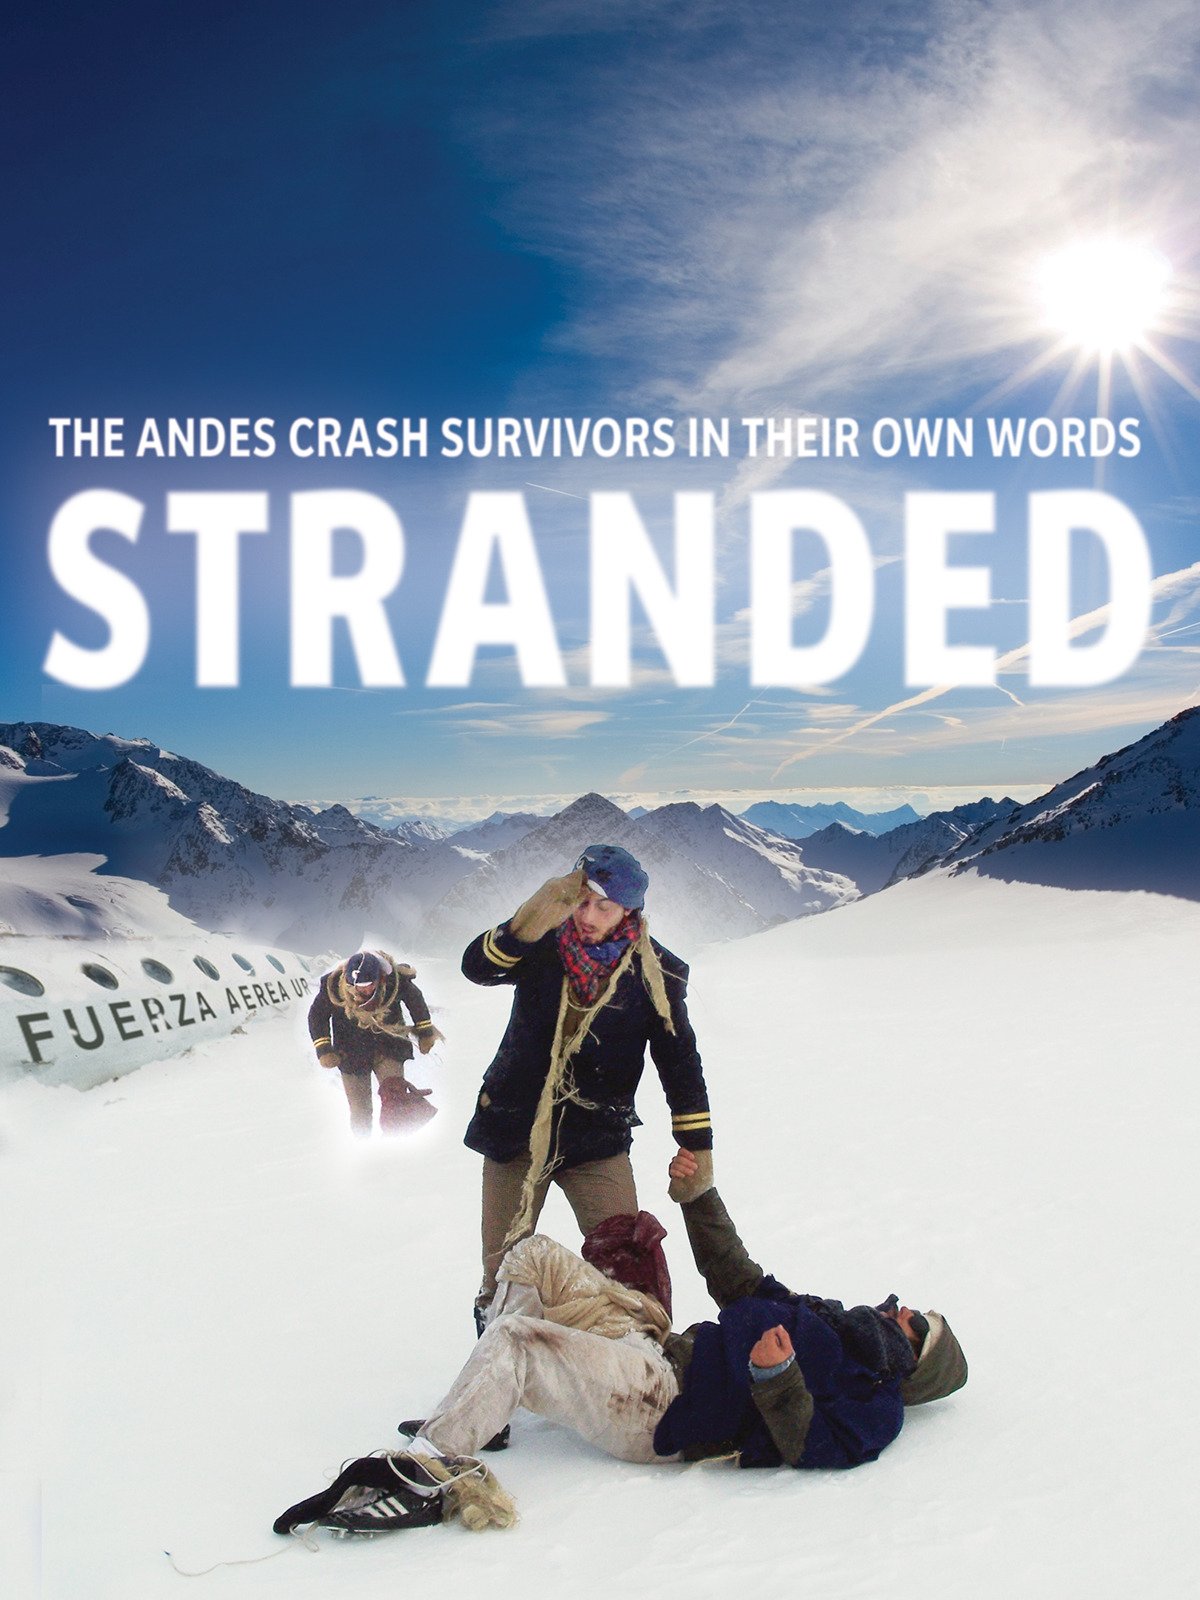 Stranded I’ve Come From a Plane That Crashed on the Mountains (2008)